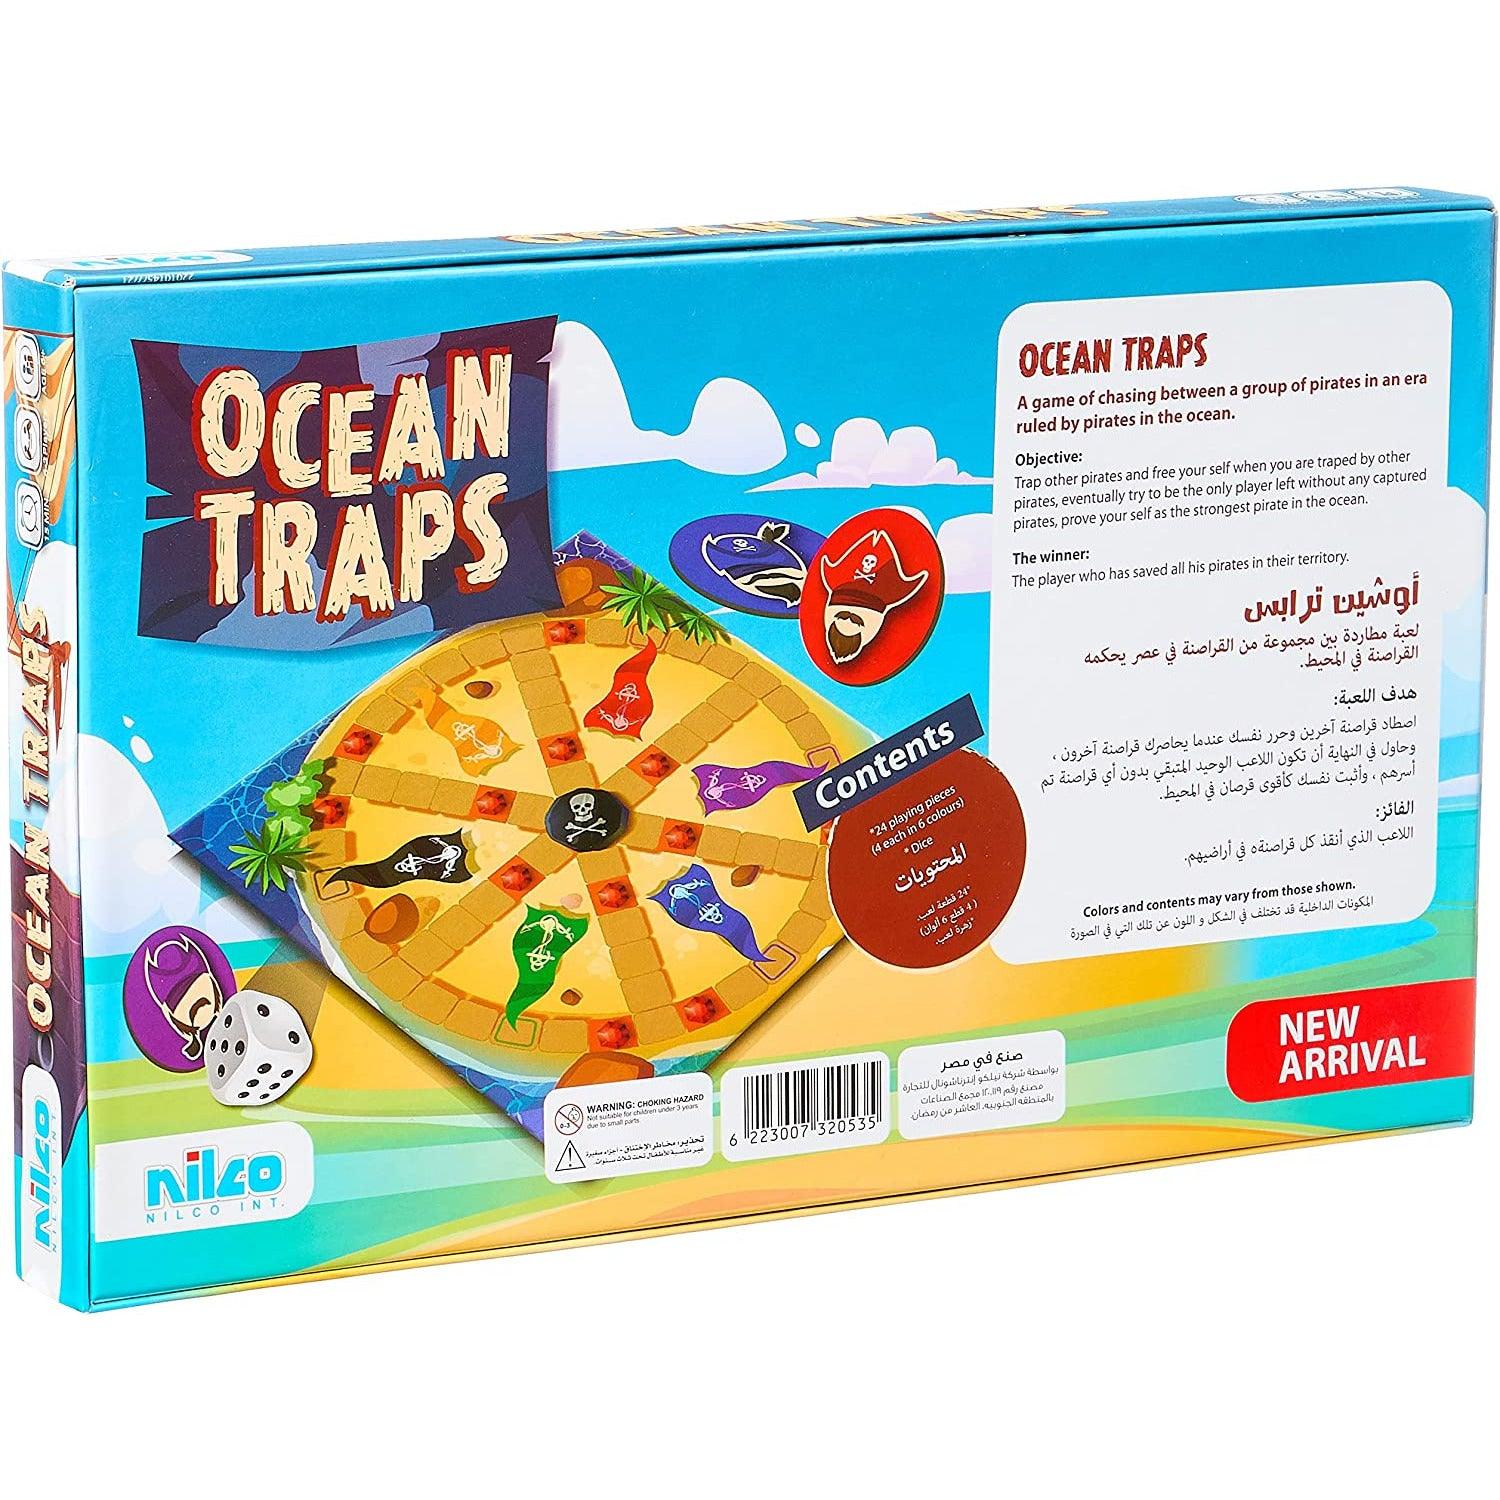 Nilco Ocean Traps Board Game - BumbleToys - 5-7 Years, Card & Board Games, Nilco, Puzzle & Board & Card Games, Unisex